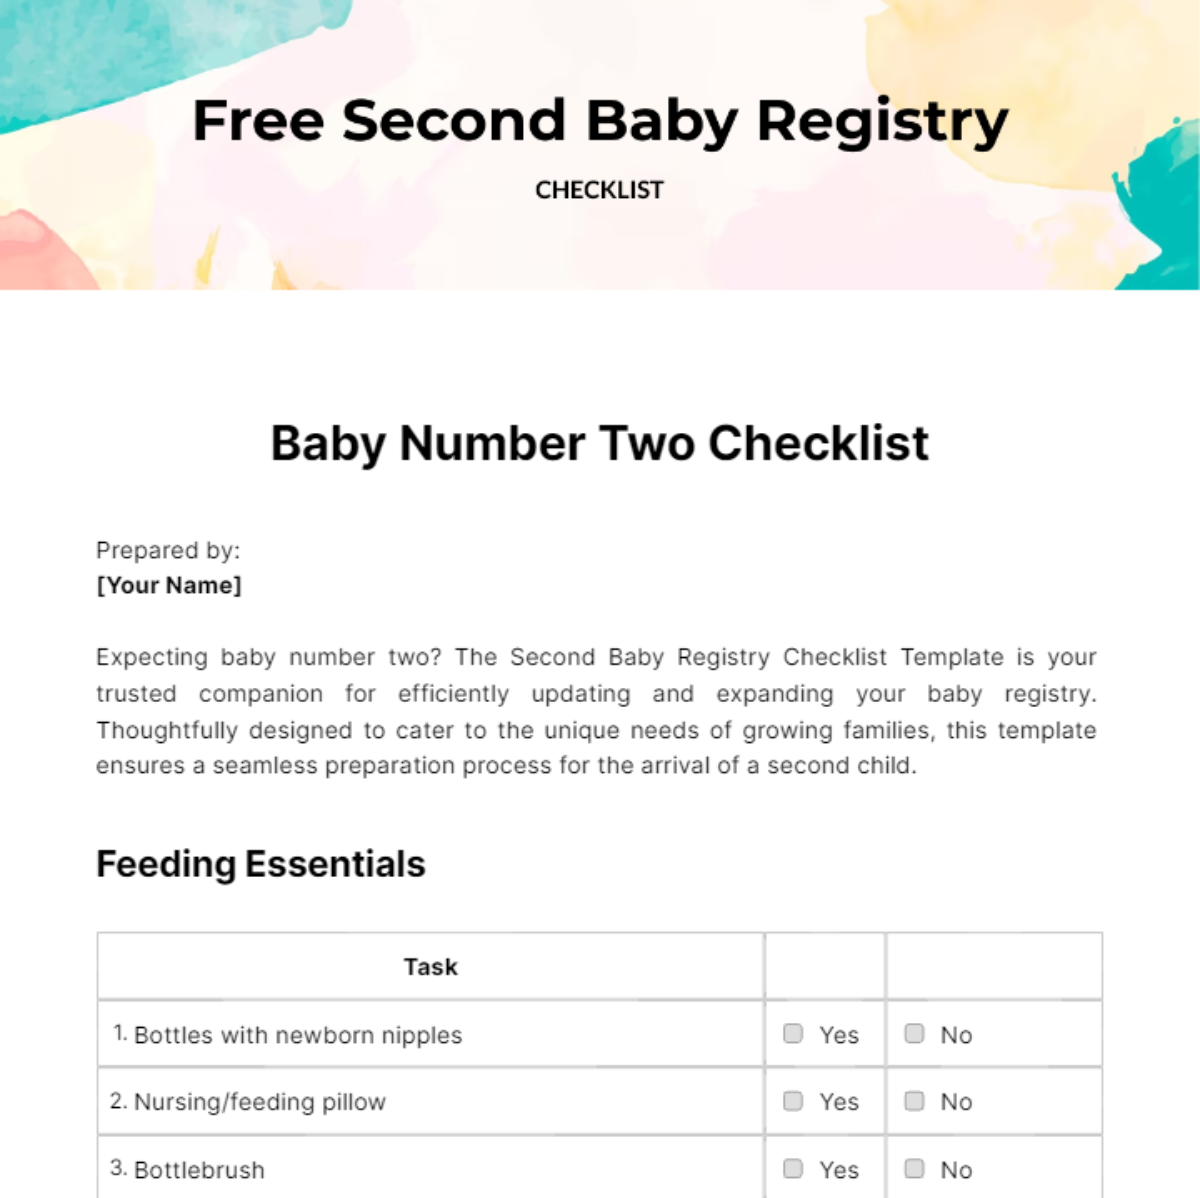 Free Second Baby Registry Checklist Template